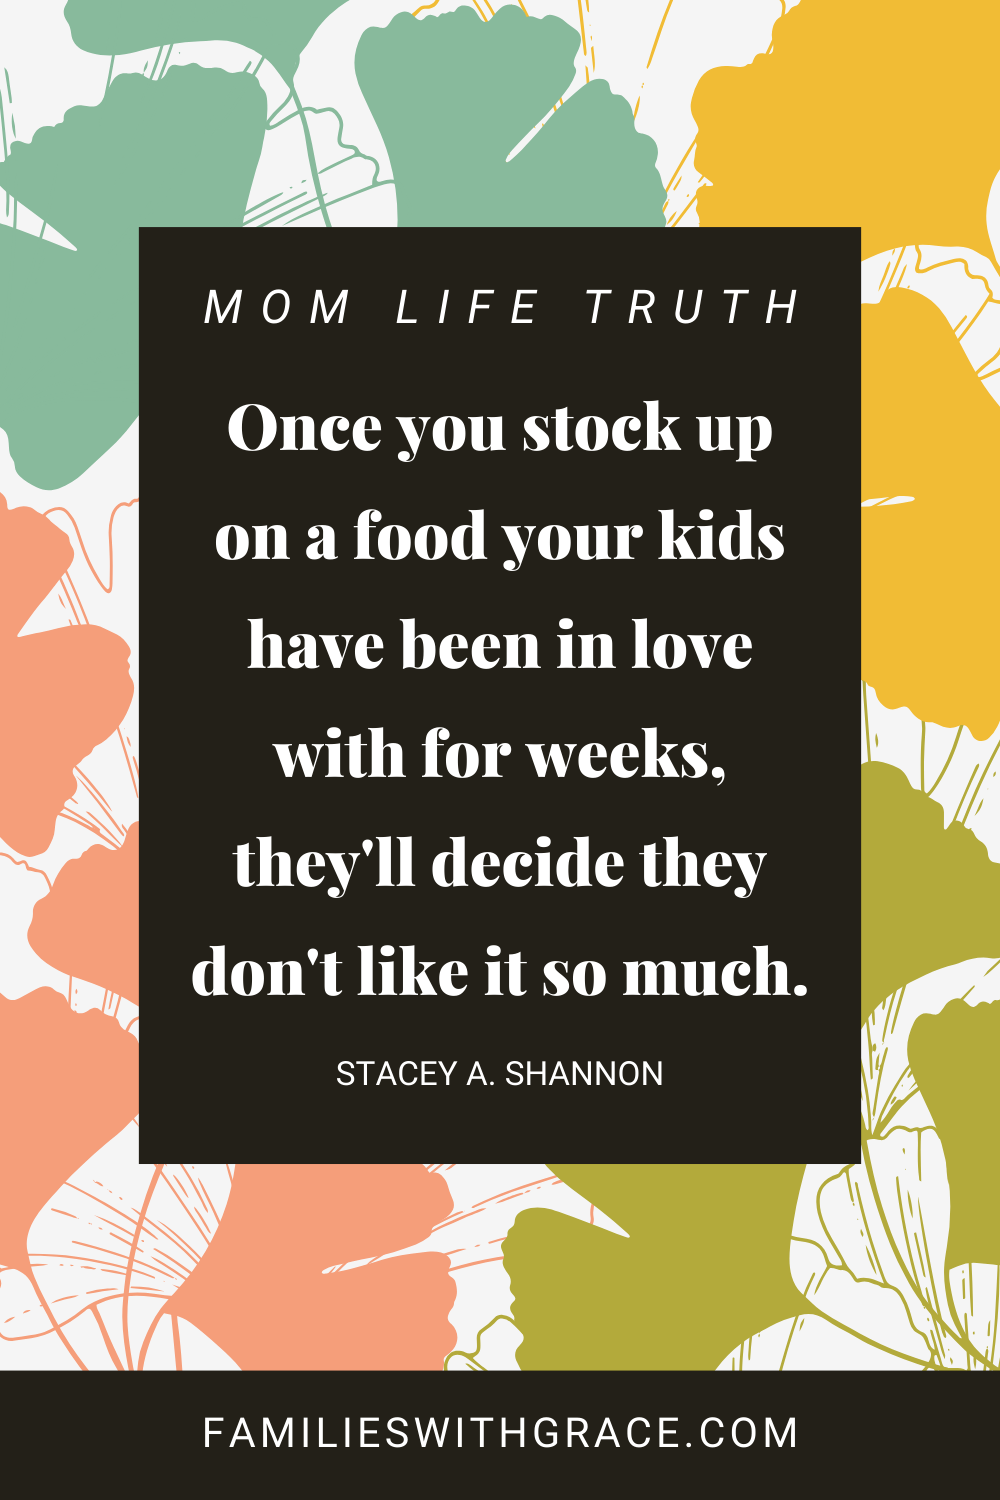 60 Motherhood truths to inspire you and make you laugh